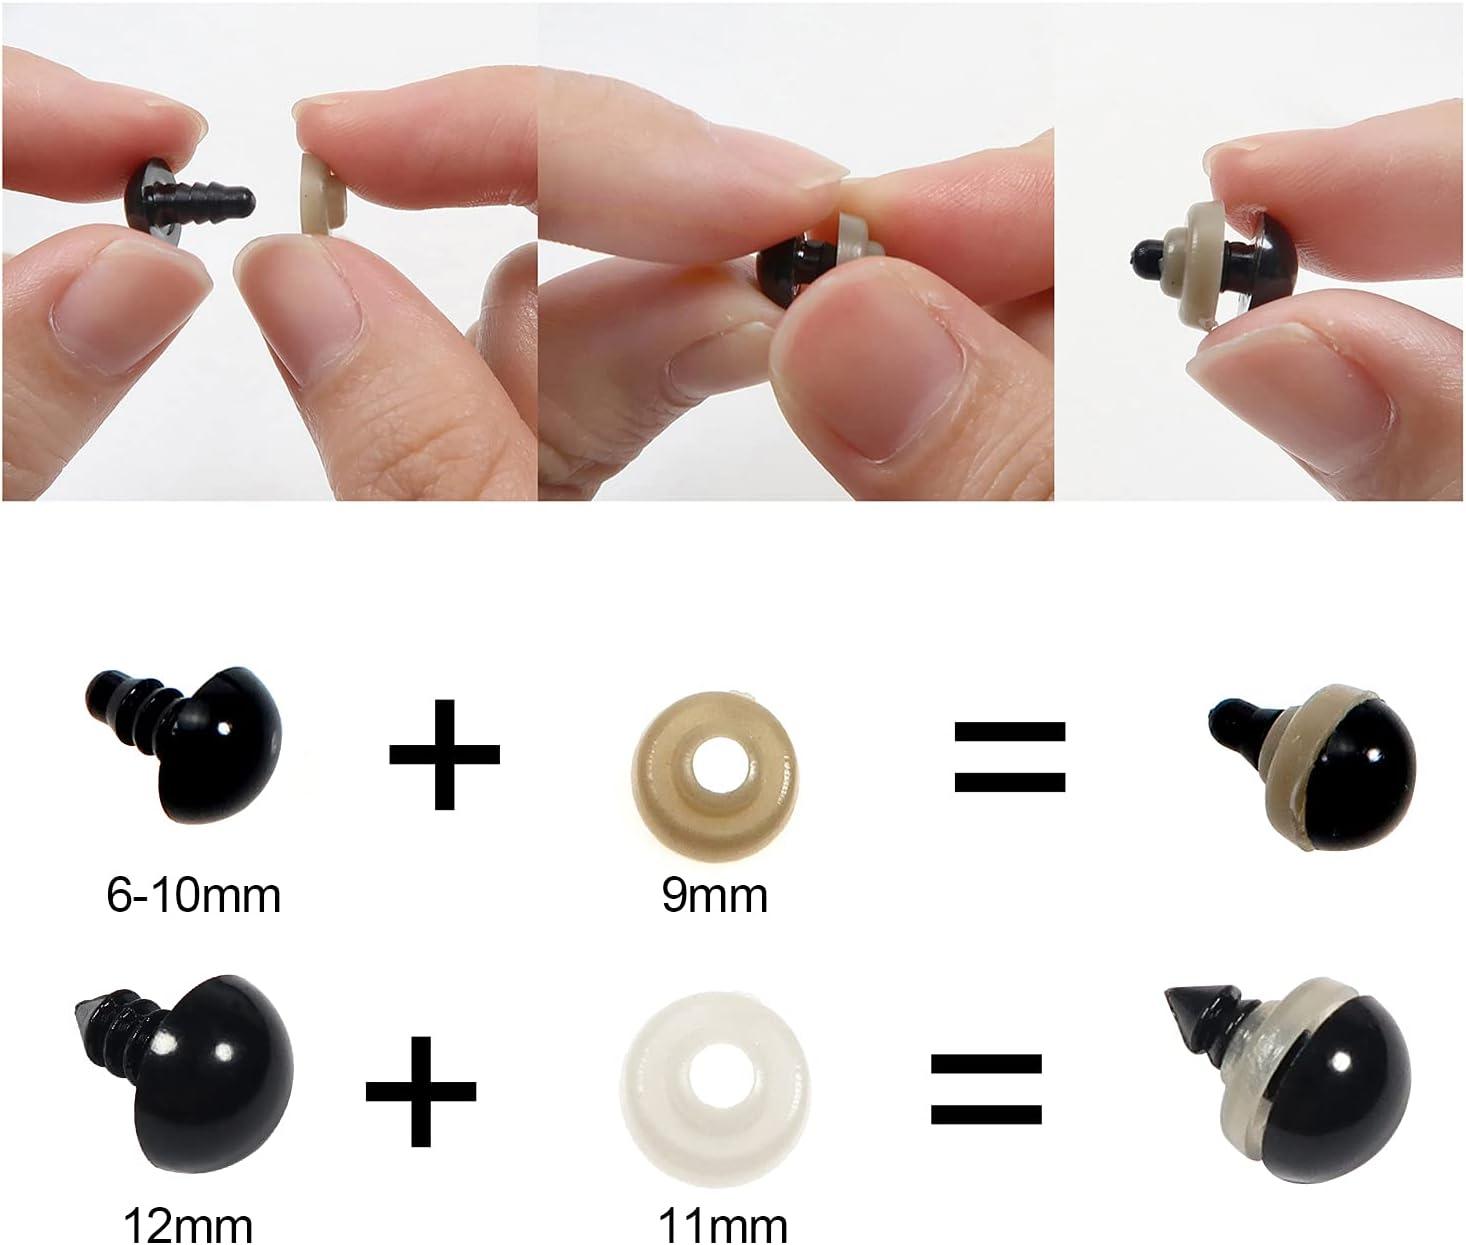 TOAOB 150pcs Black Plastic Safety Eyes with Washers 6mm 8mm 9mm 10mm 12mm  Craft Doll Eyes for Amigurumis Crochet and Stuffed Animals Bears Making